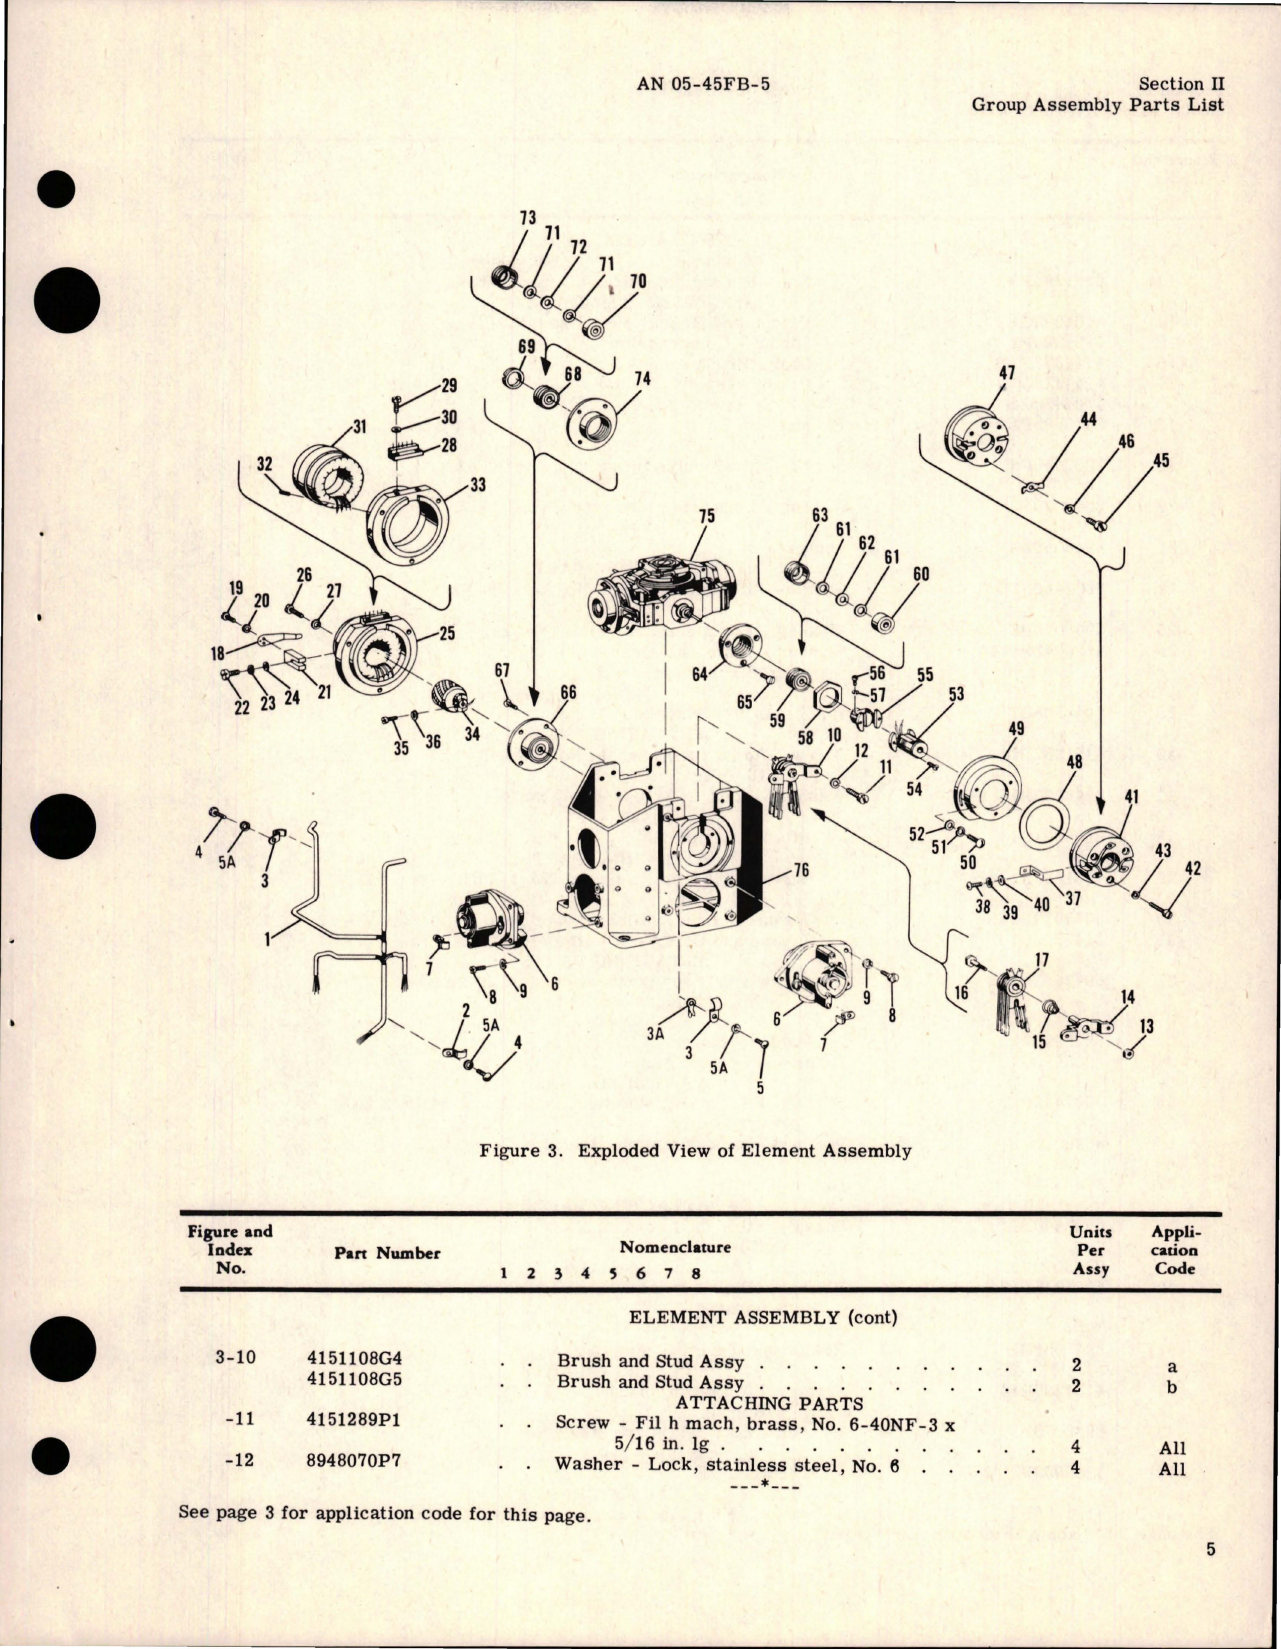 Sample page 7 from AirCorps Library document: Parts Catalog Vertical Gyro Unit for Type G-3 Auto Pilot - Parts 8948502G1 and 8948502G3